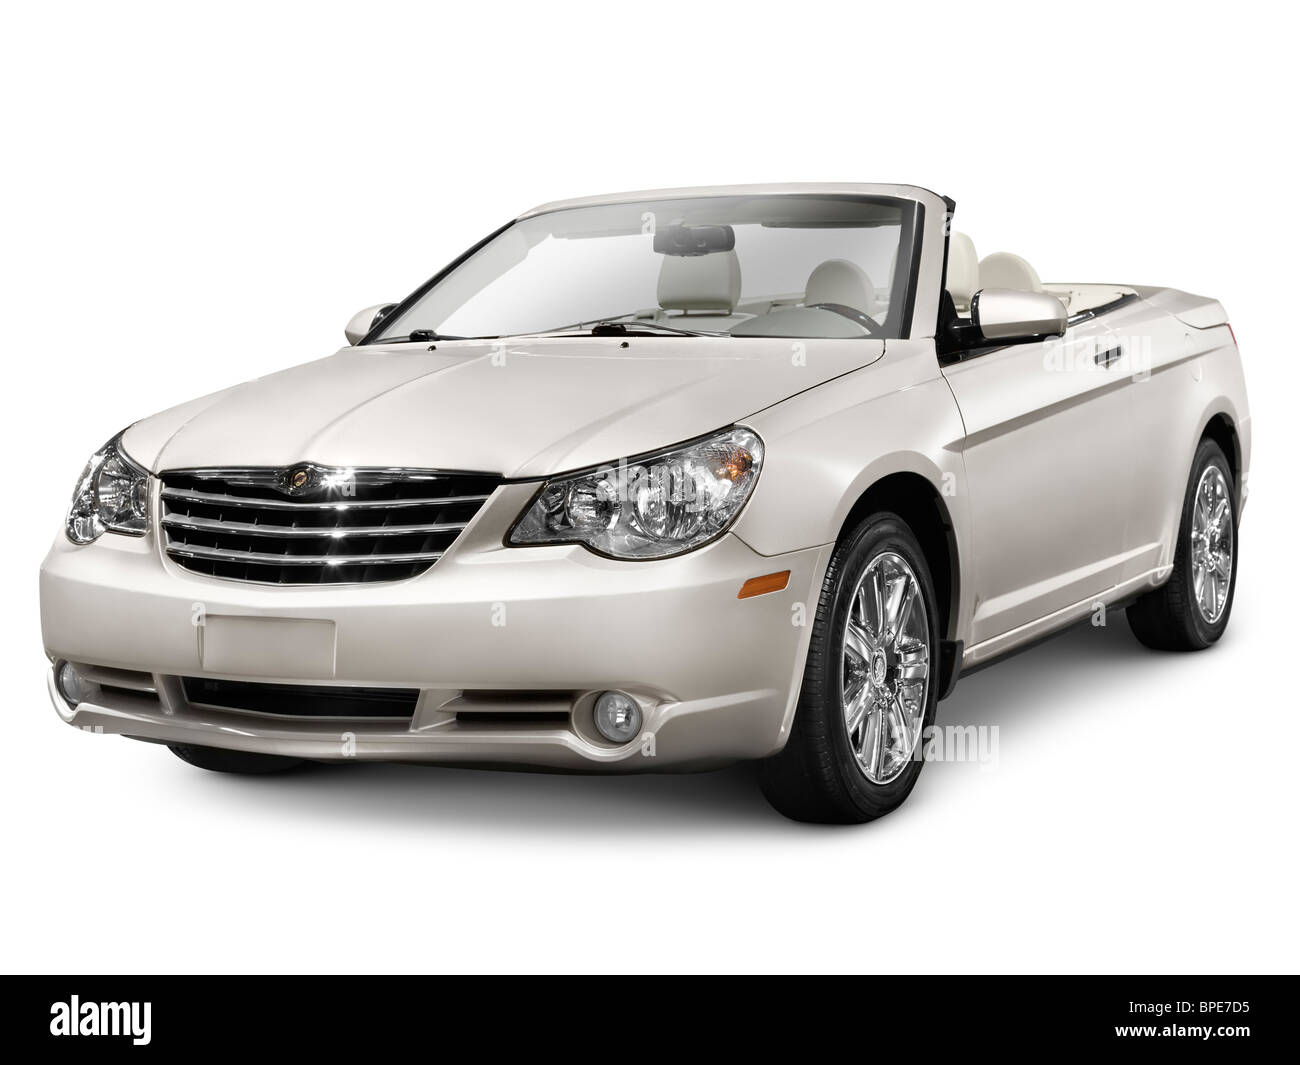 2010 Chrysler Sebring Convertible Limited. Isolated car on white background  with clipping path Stock Photo - Alamy